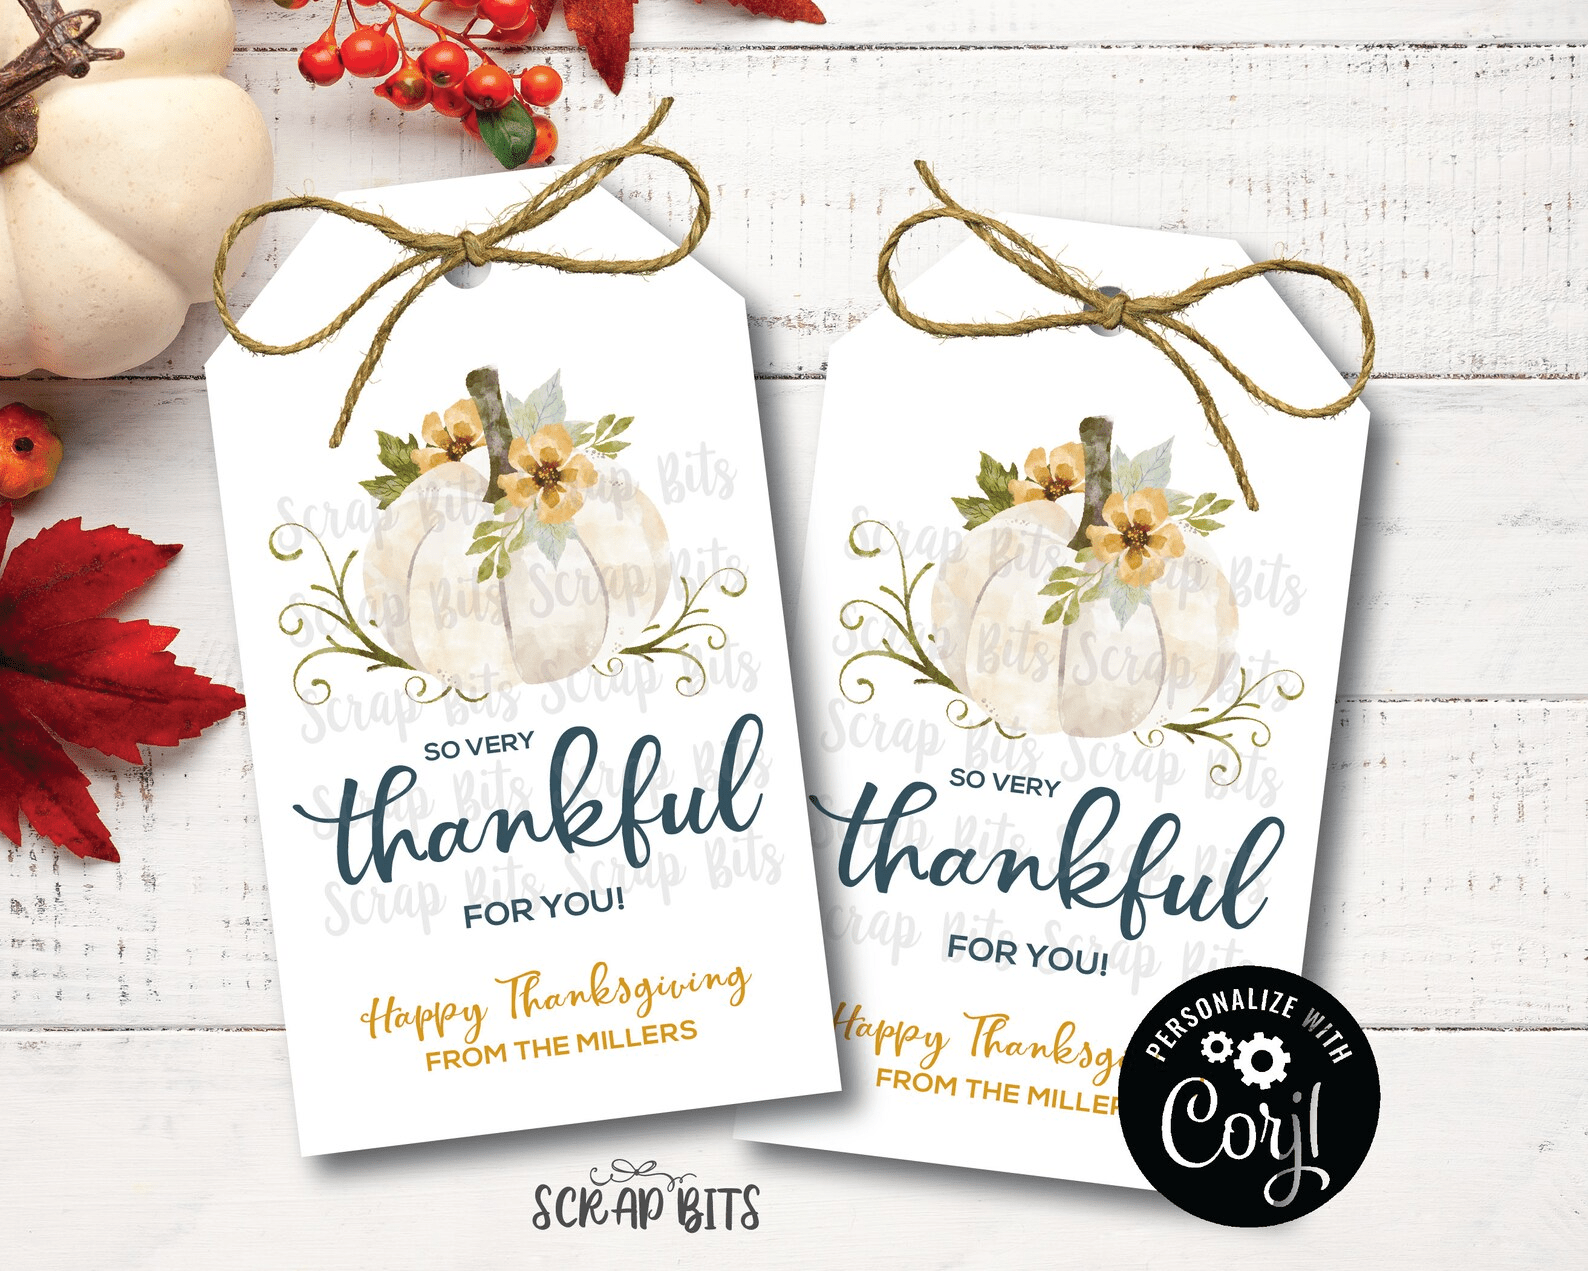 Thankful White Pumpkin Tags, So Thankful Tags, Printable Thanksgiving Tags . Instant Download Editable Template - Scrap Bits